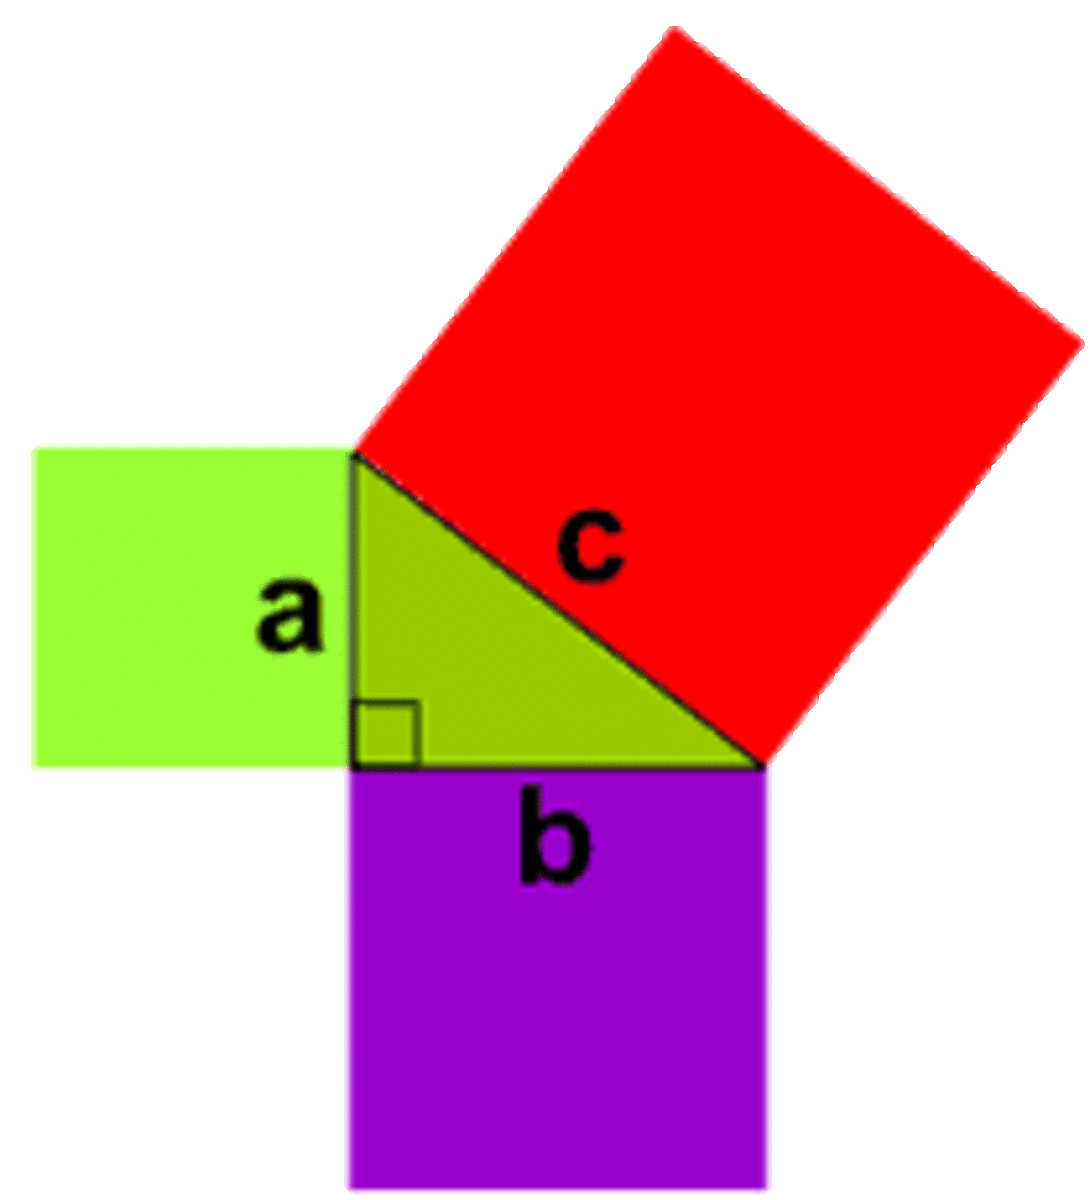 hands-on-math-using-the-pythagorean-theorem